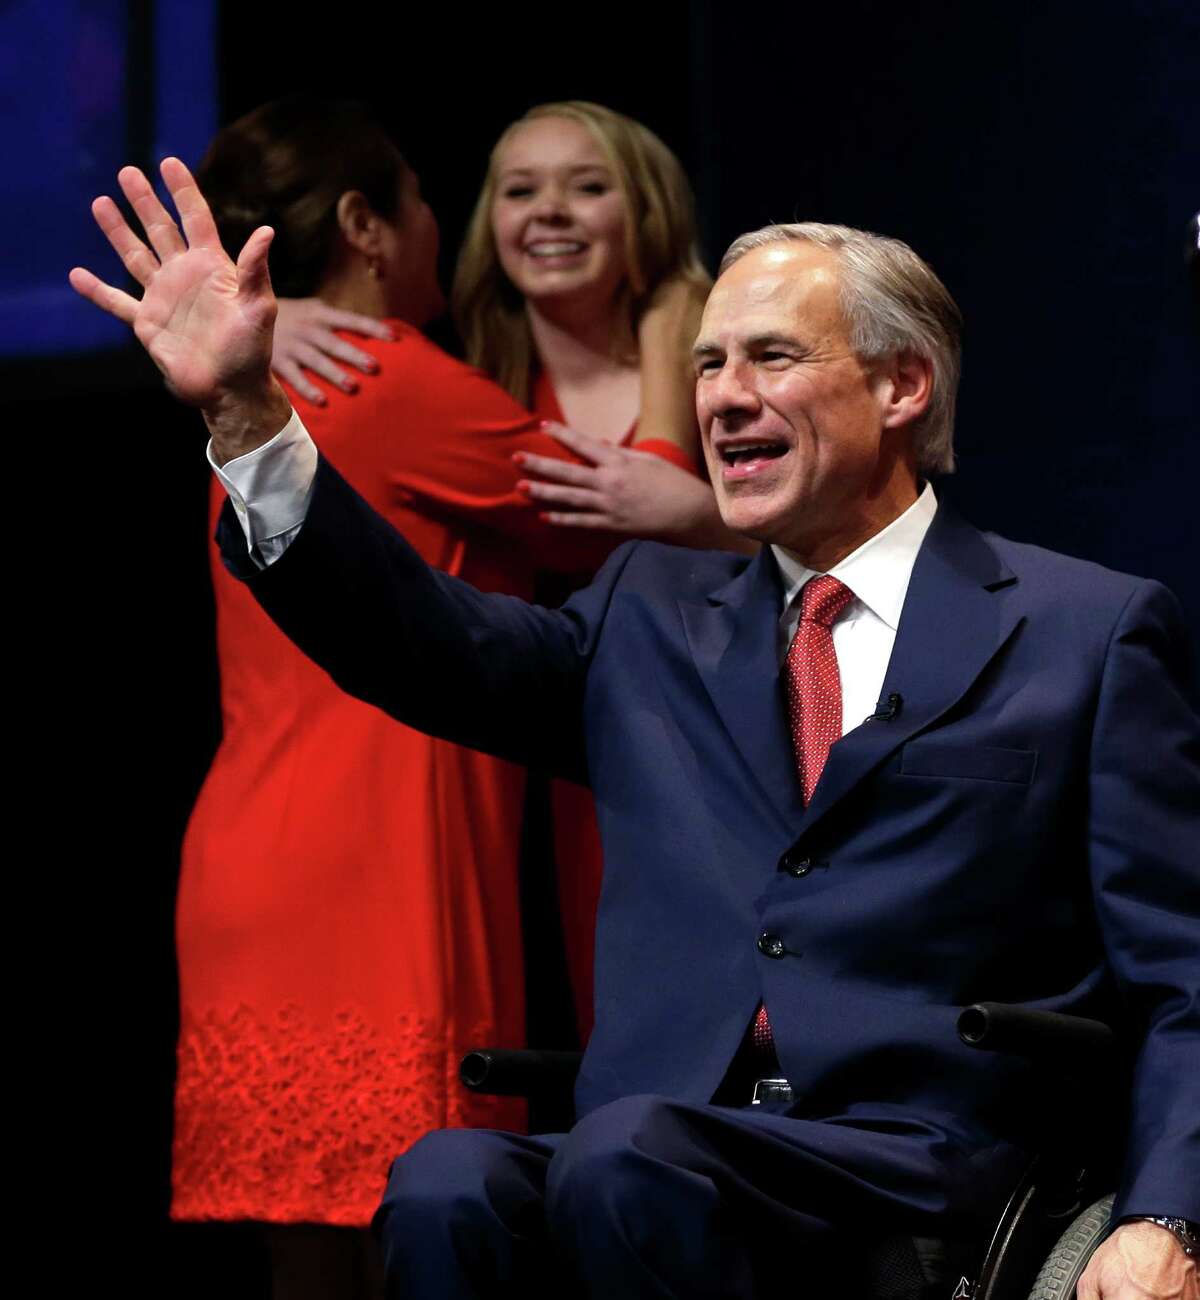 Texas Attorney General and Republican candidate for governor Greg Abbott waves to the crowd before his victory speech Tuesday, Nov. 4, 2014, in Austin, Texas. Abbott defeated Democrat Wendy Davis to win the race for Texas governor. (AP Photo/David J. Phillip)